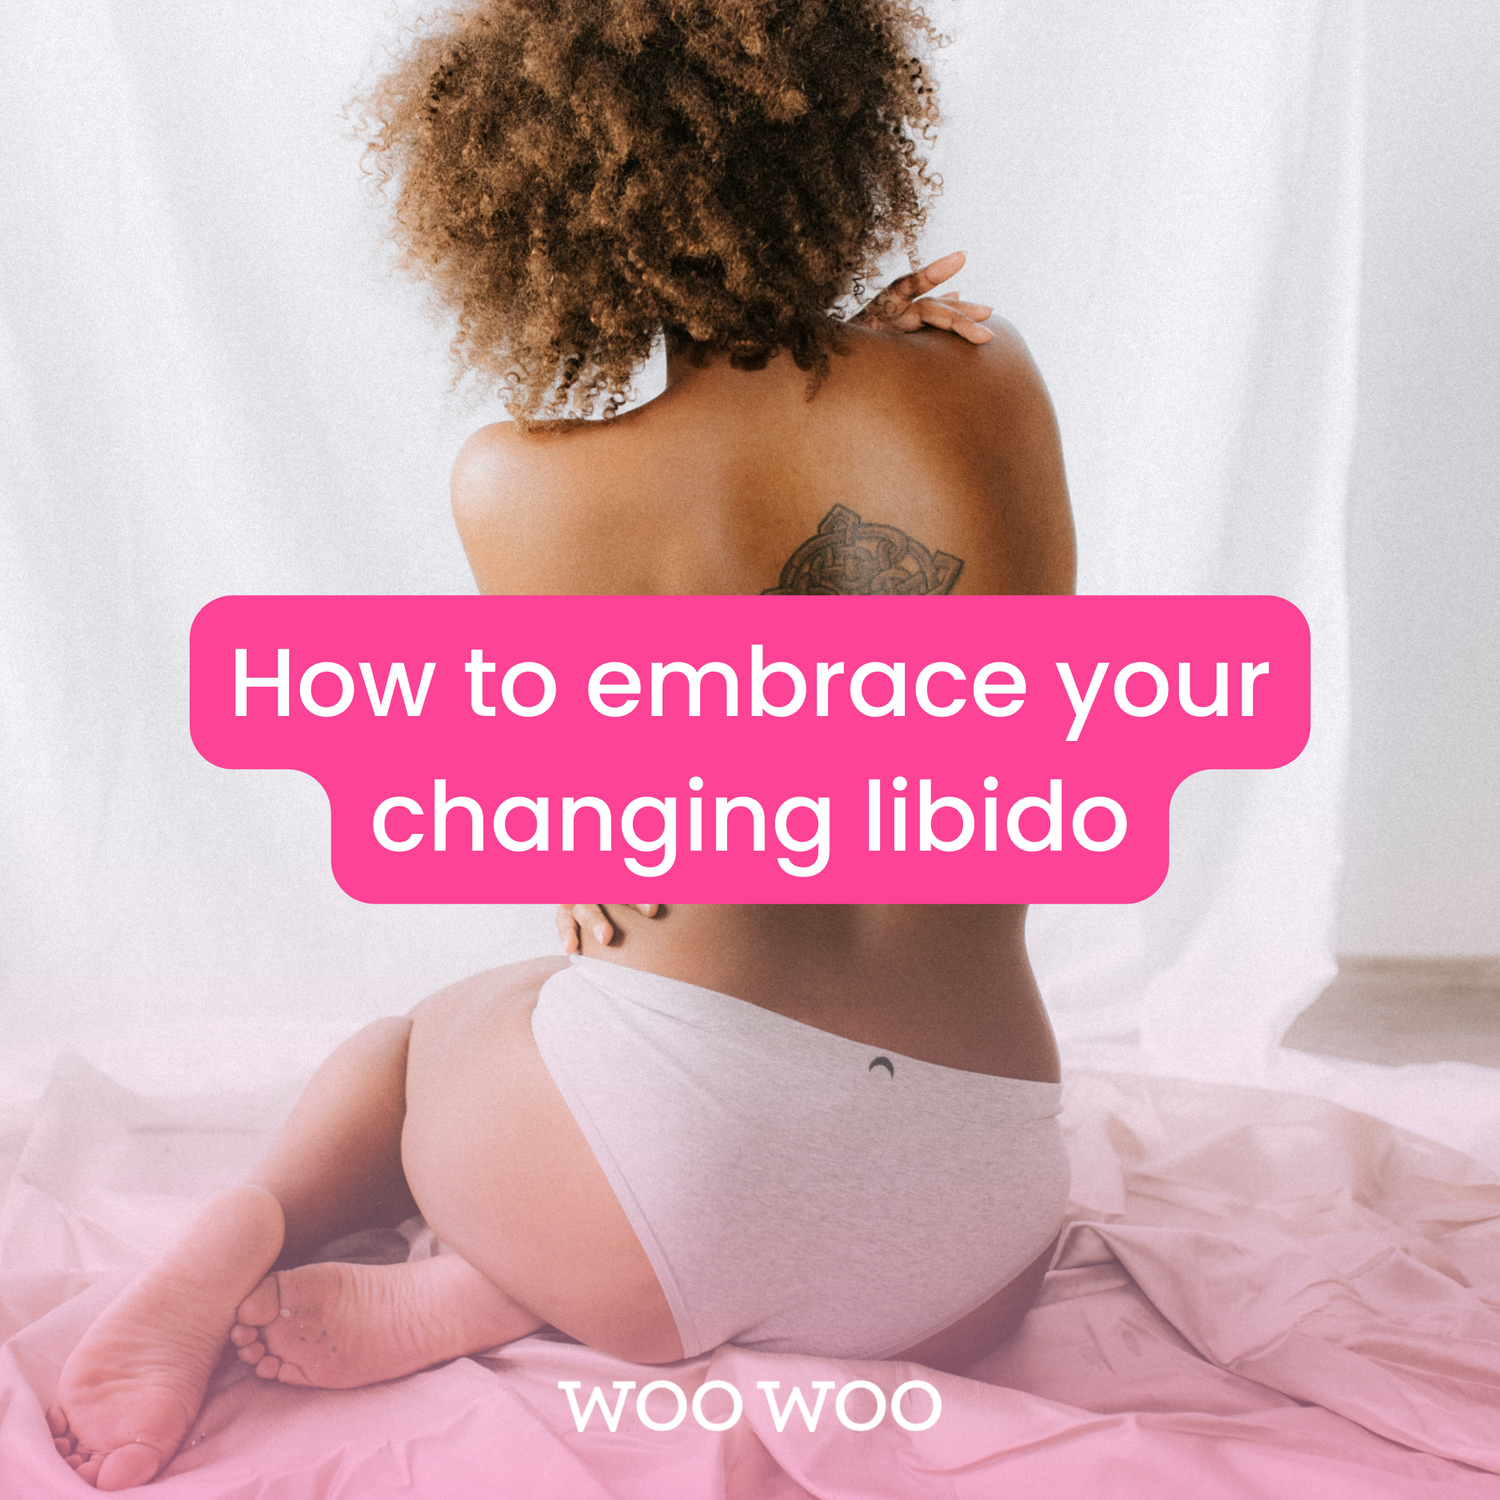 How To Embrace Your Changing Libido